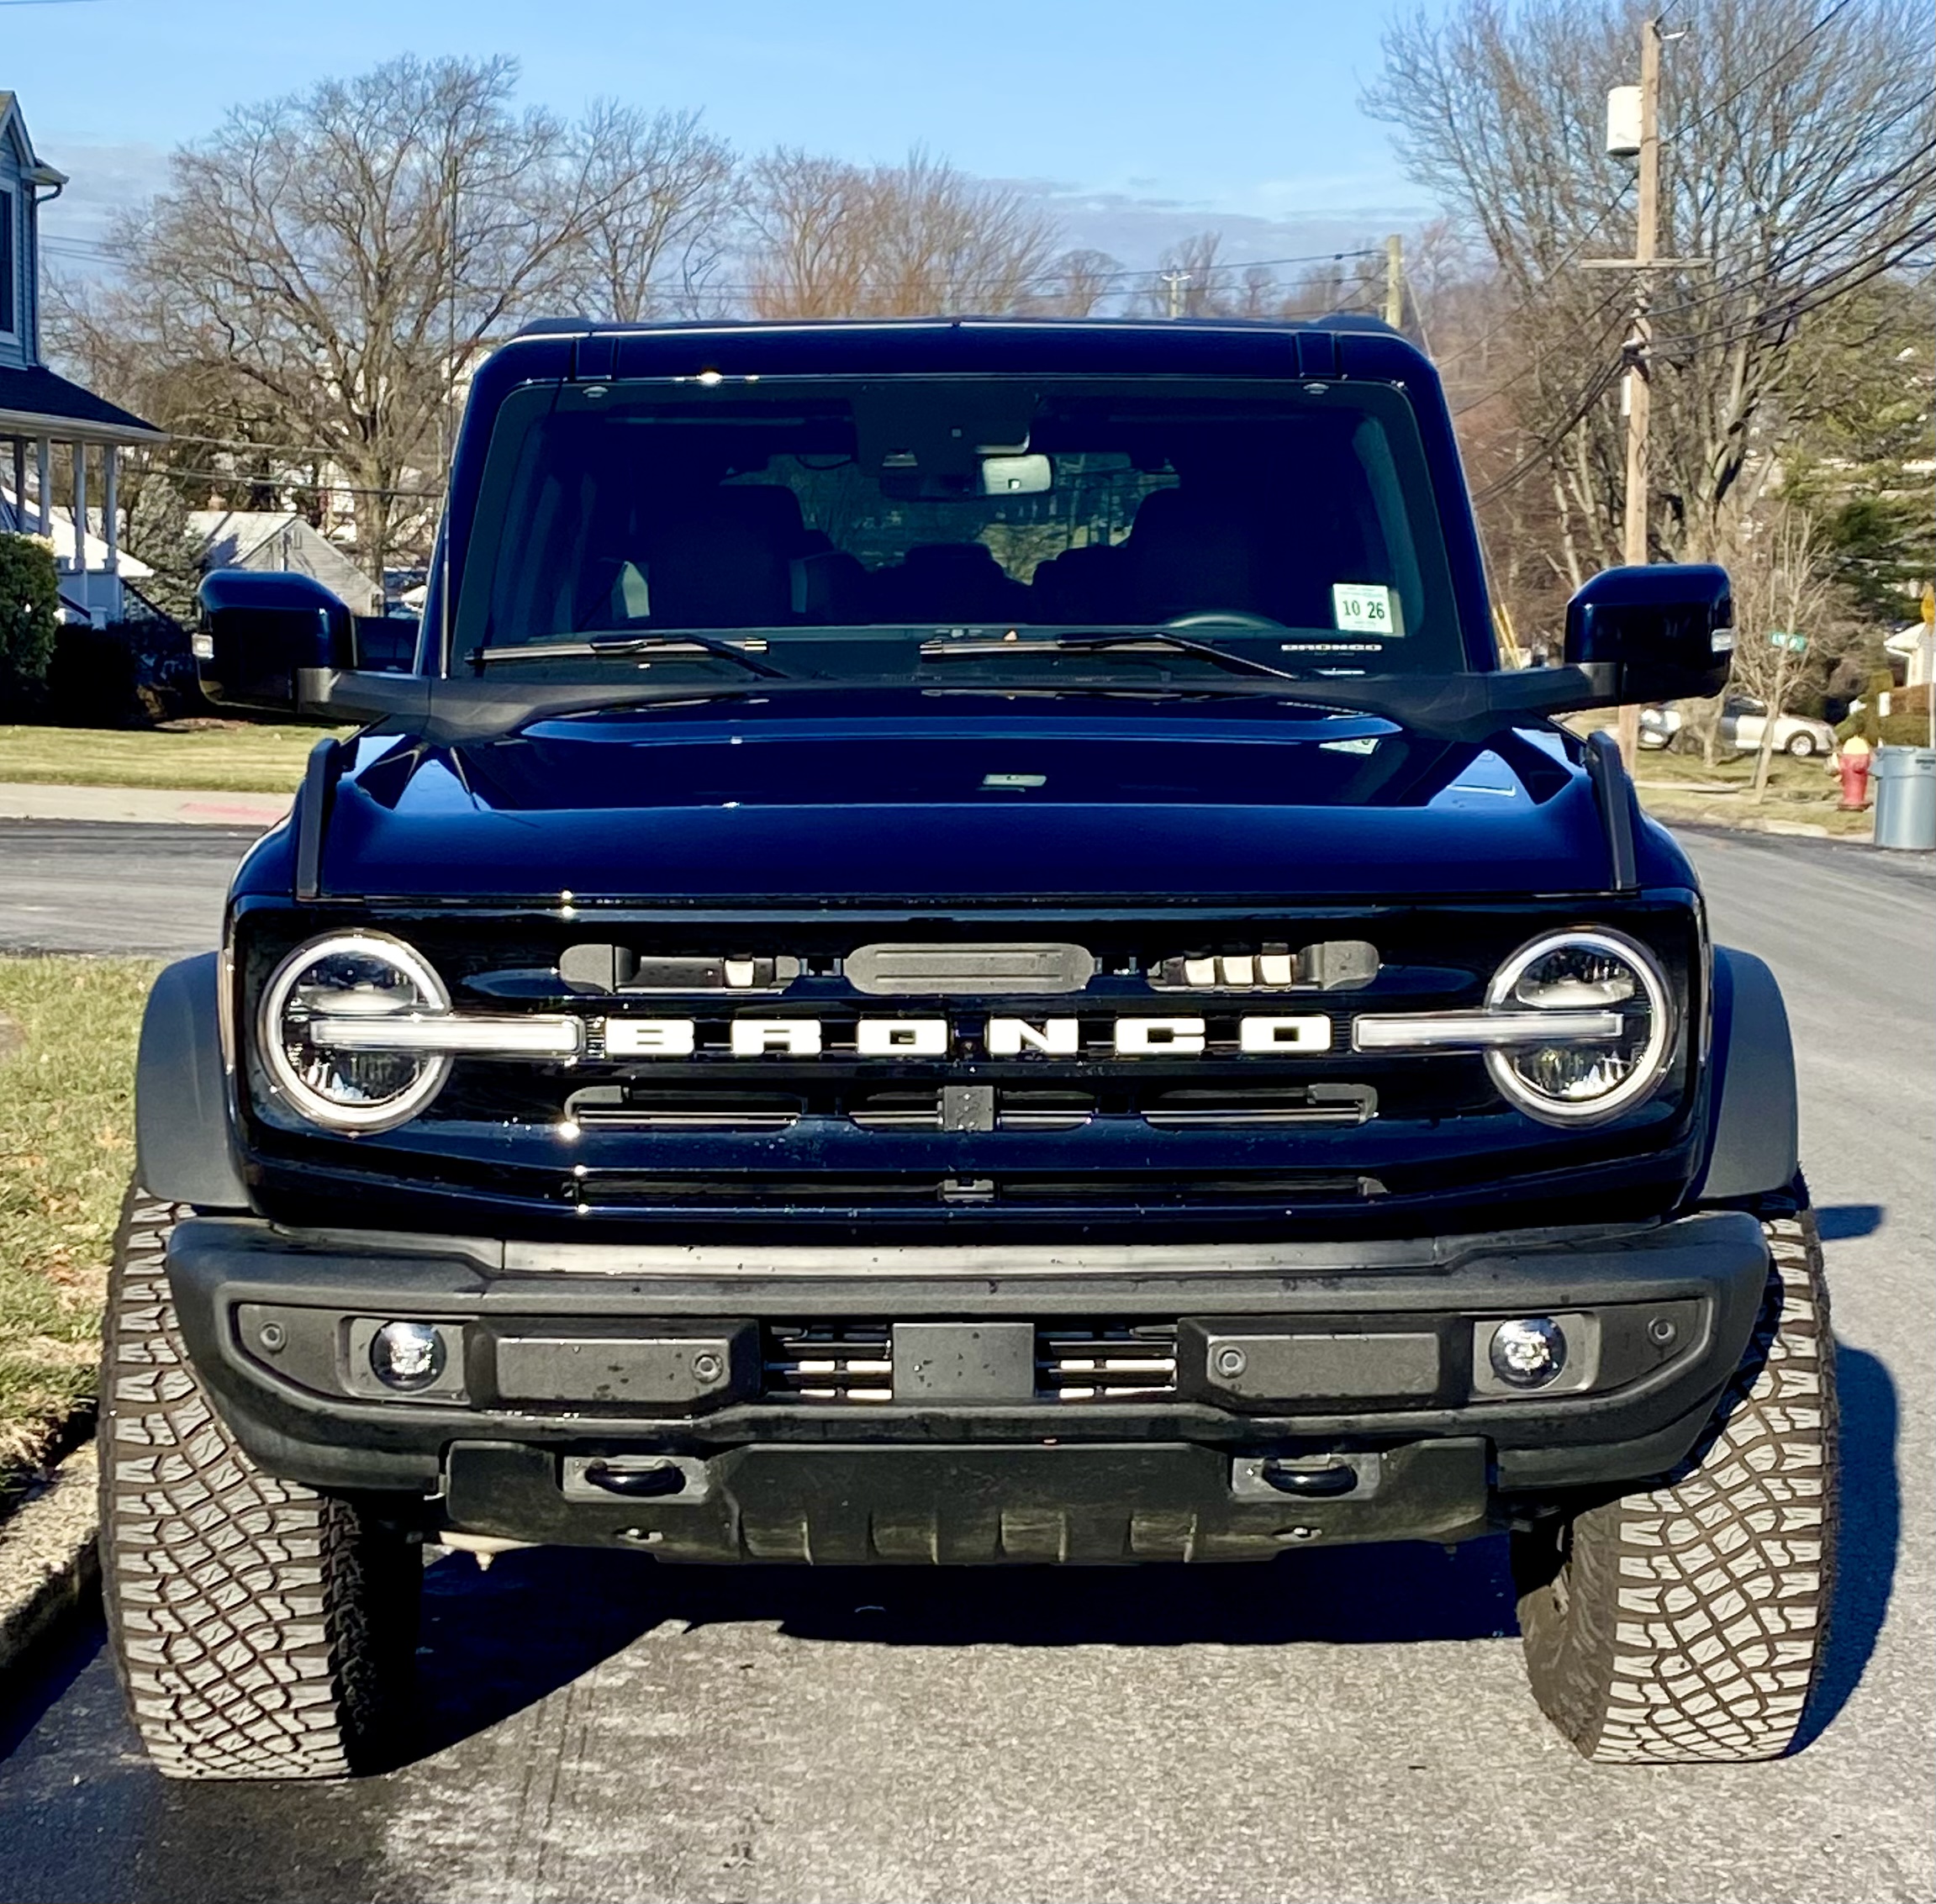 Ford Bronco Drop a Picture of Your Bronco for a Rating 0A81E06D-3A70-4734-9154-DC087D18187D